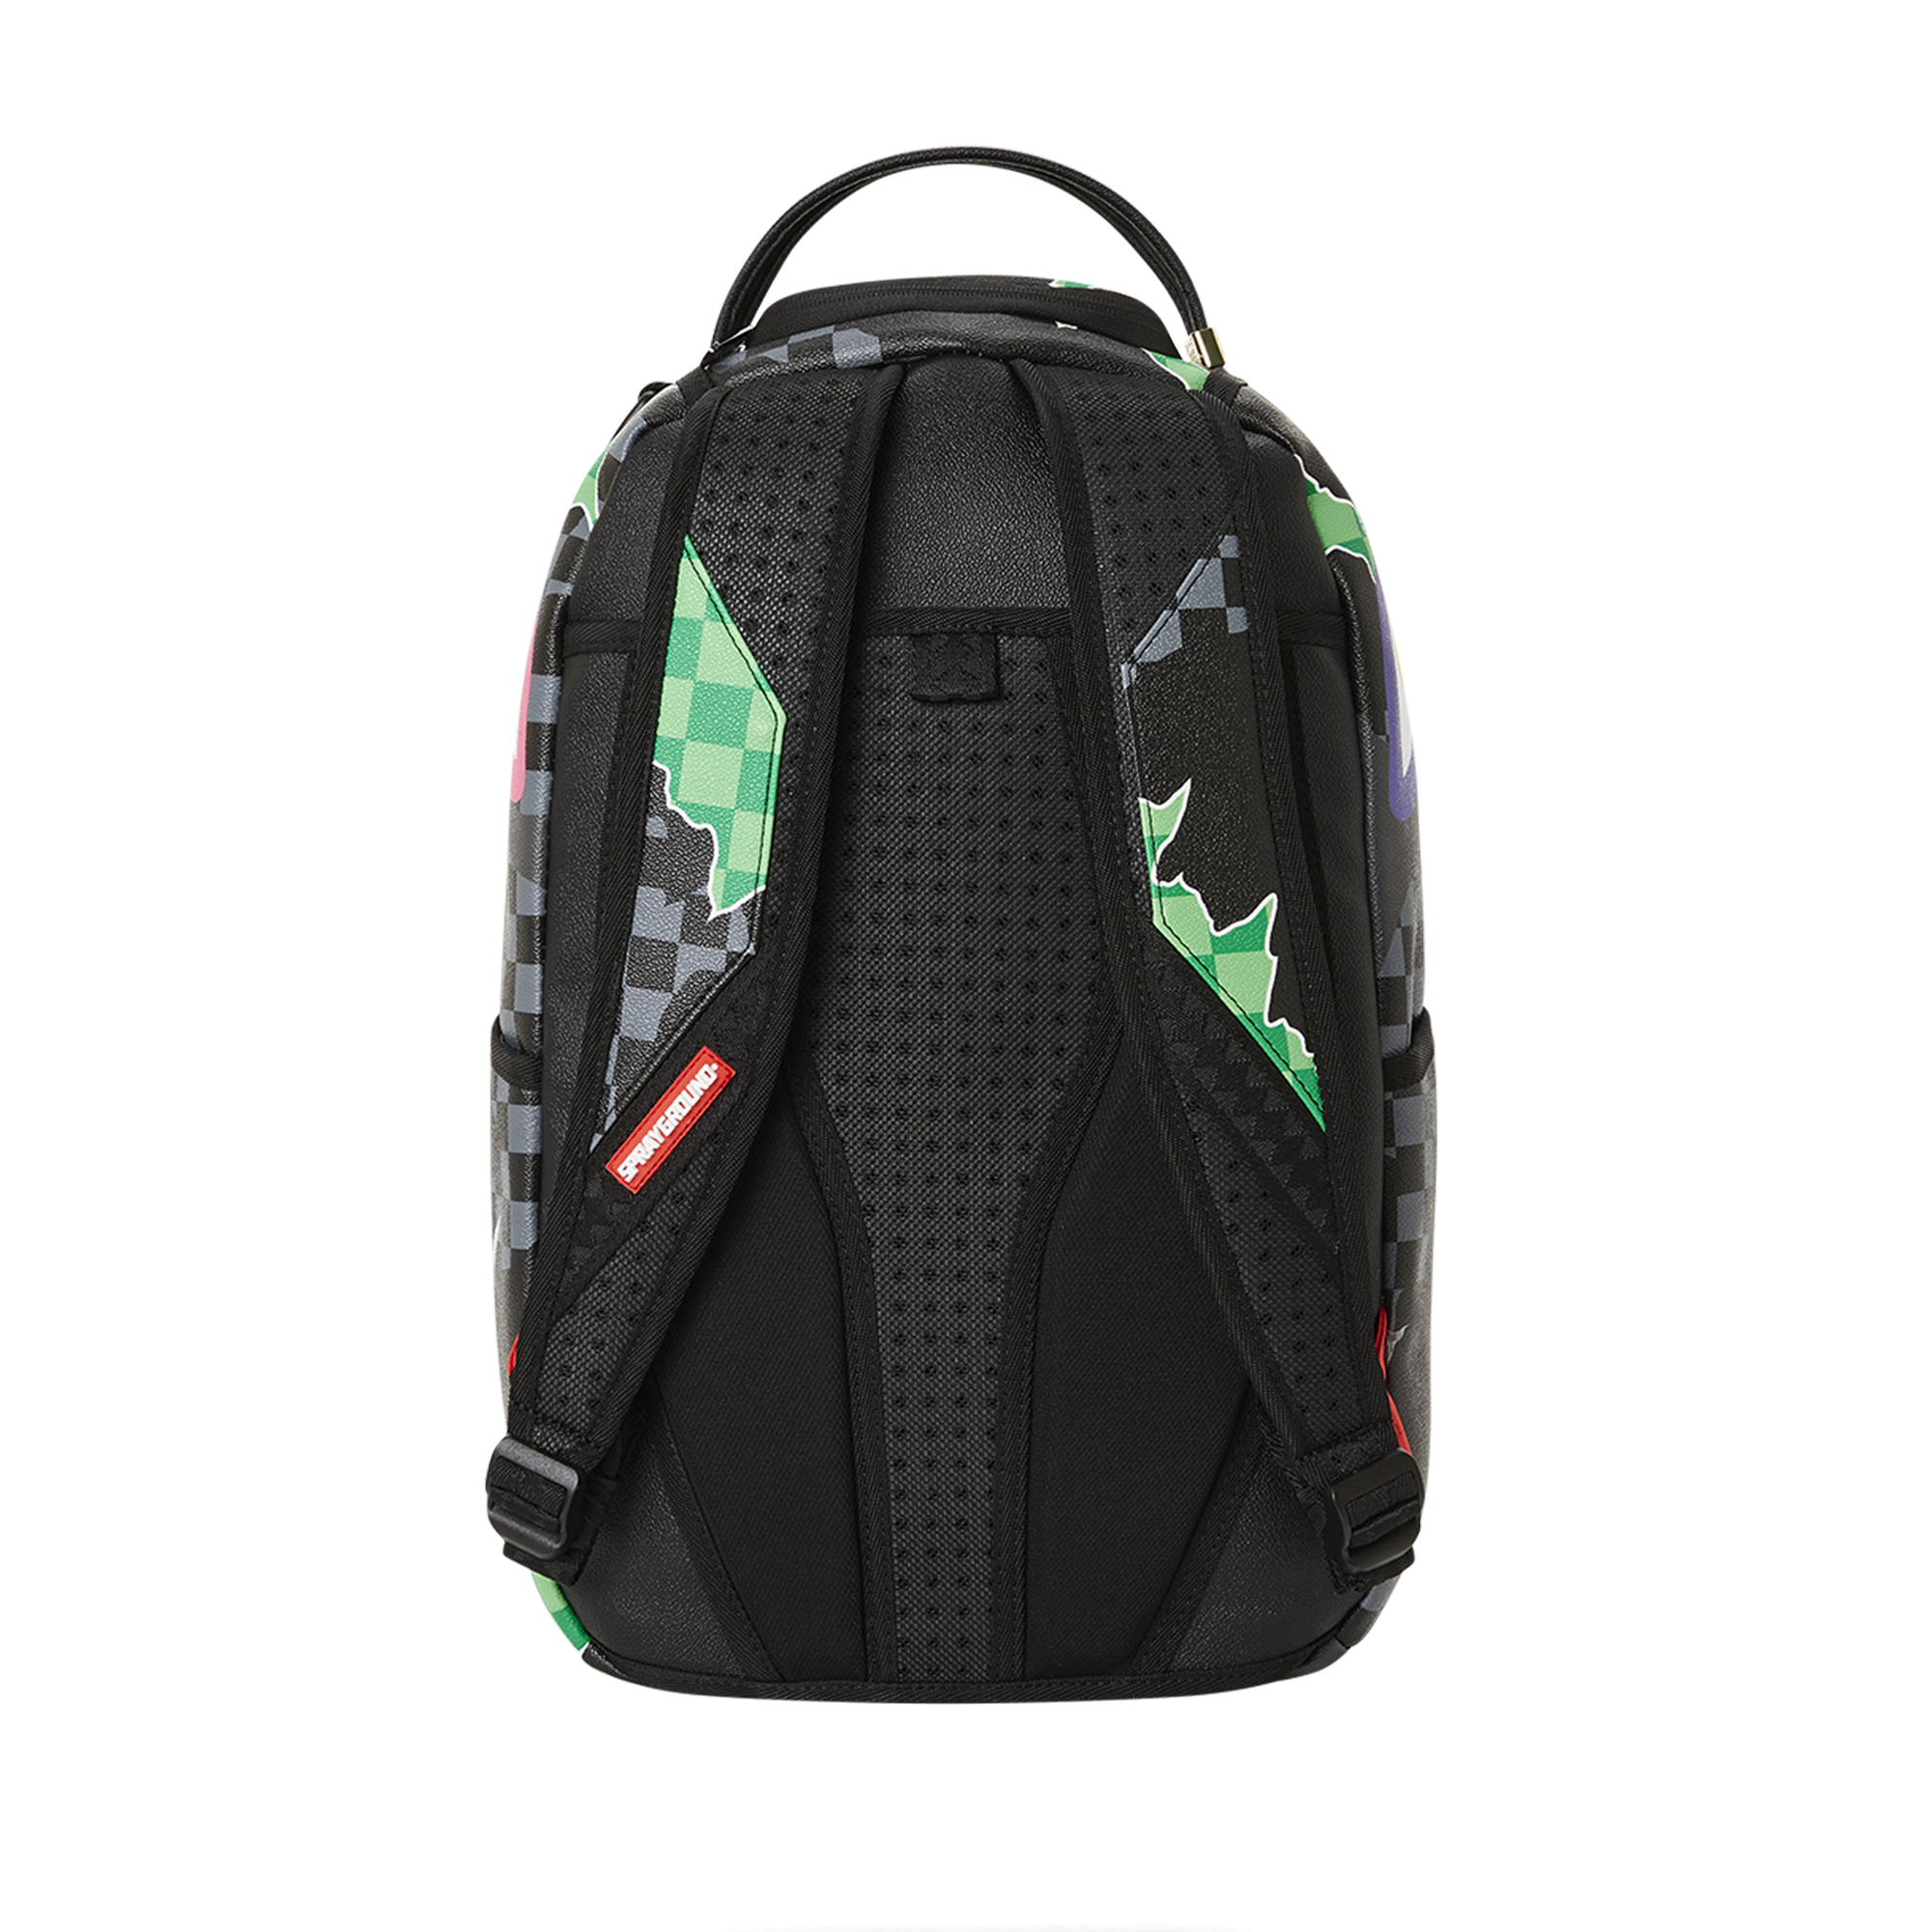 limited edition sprayground backpack for Sale in Los Angeles, CA